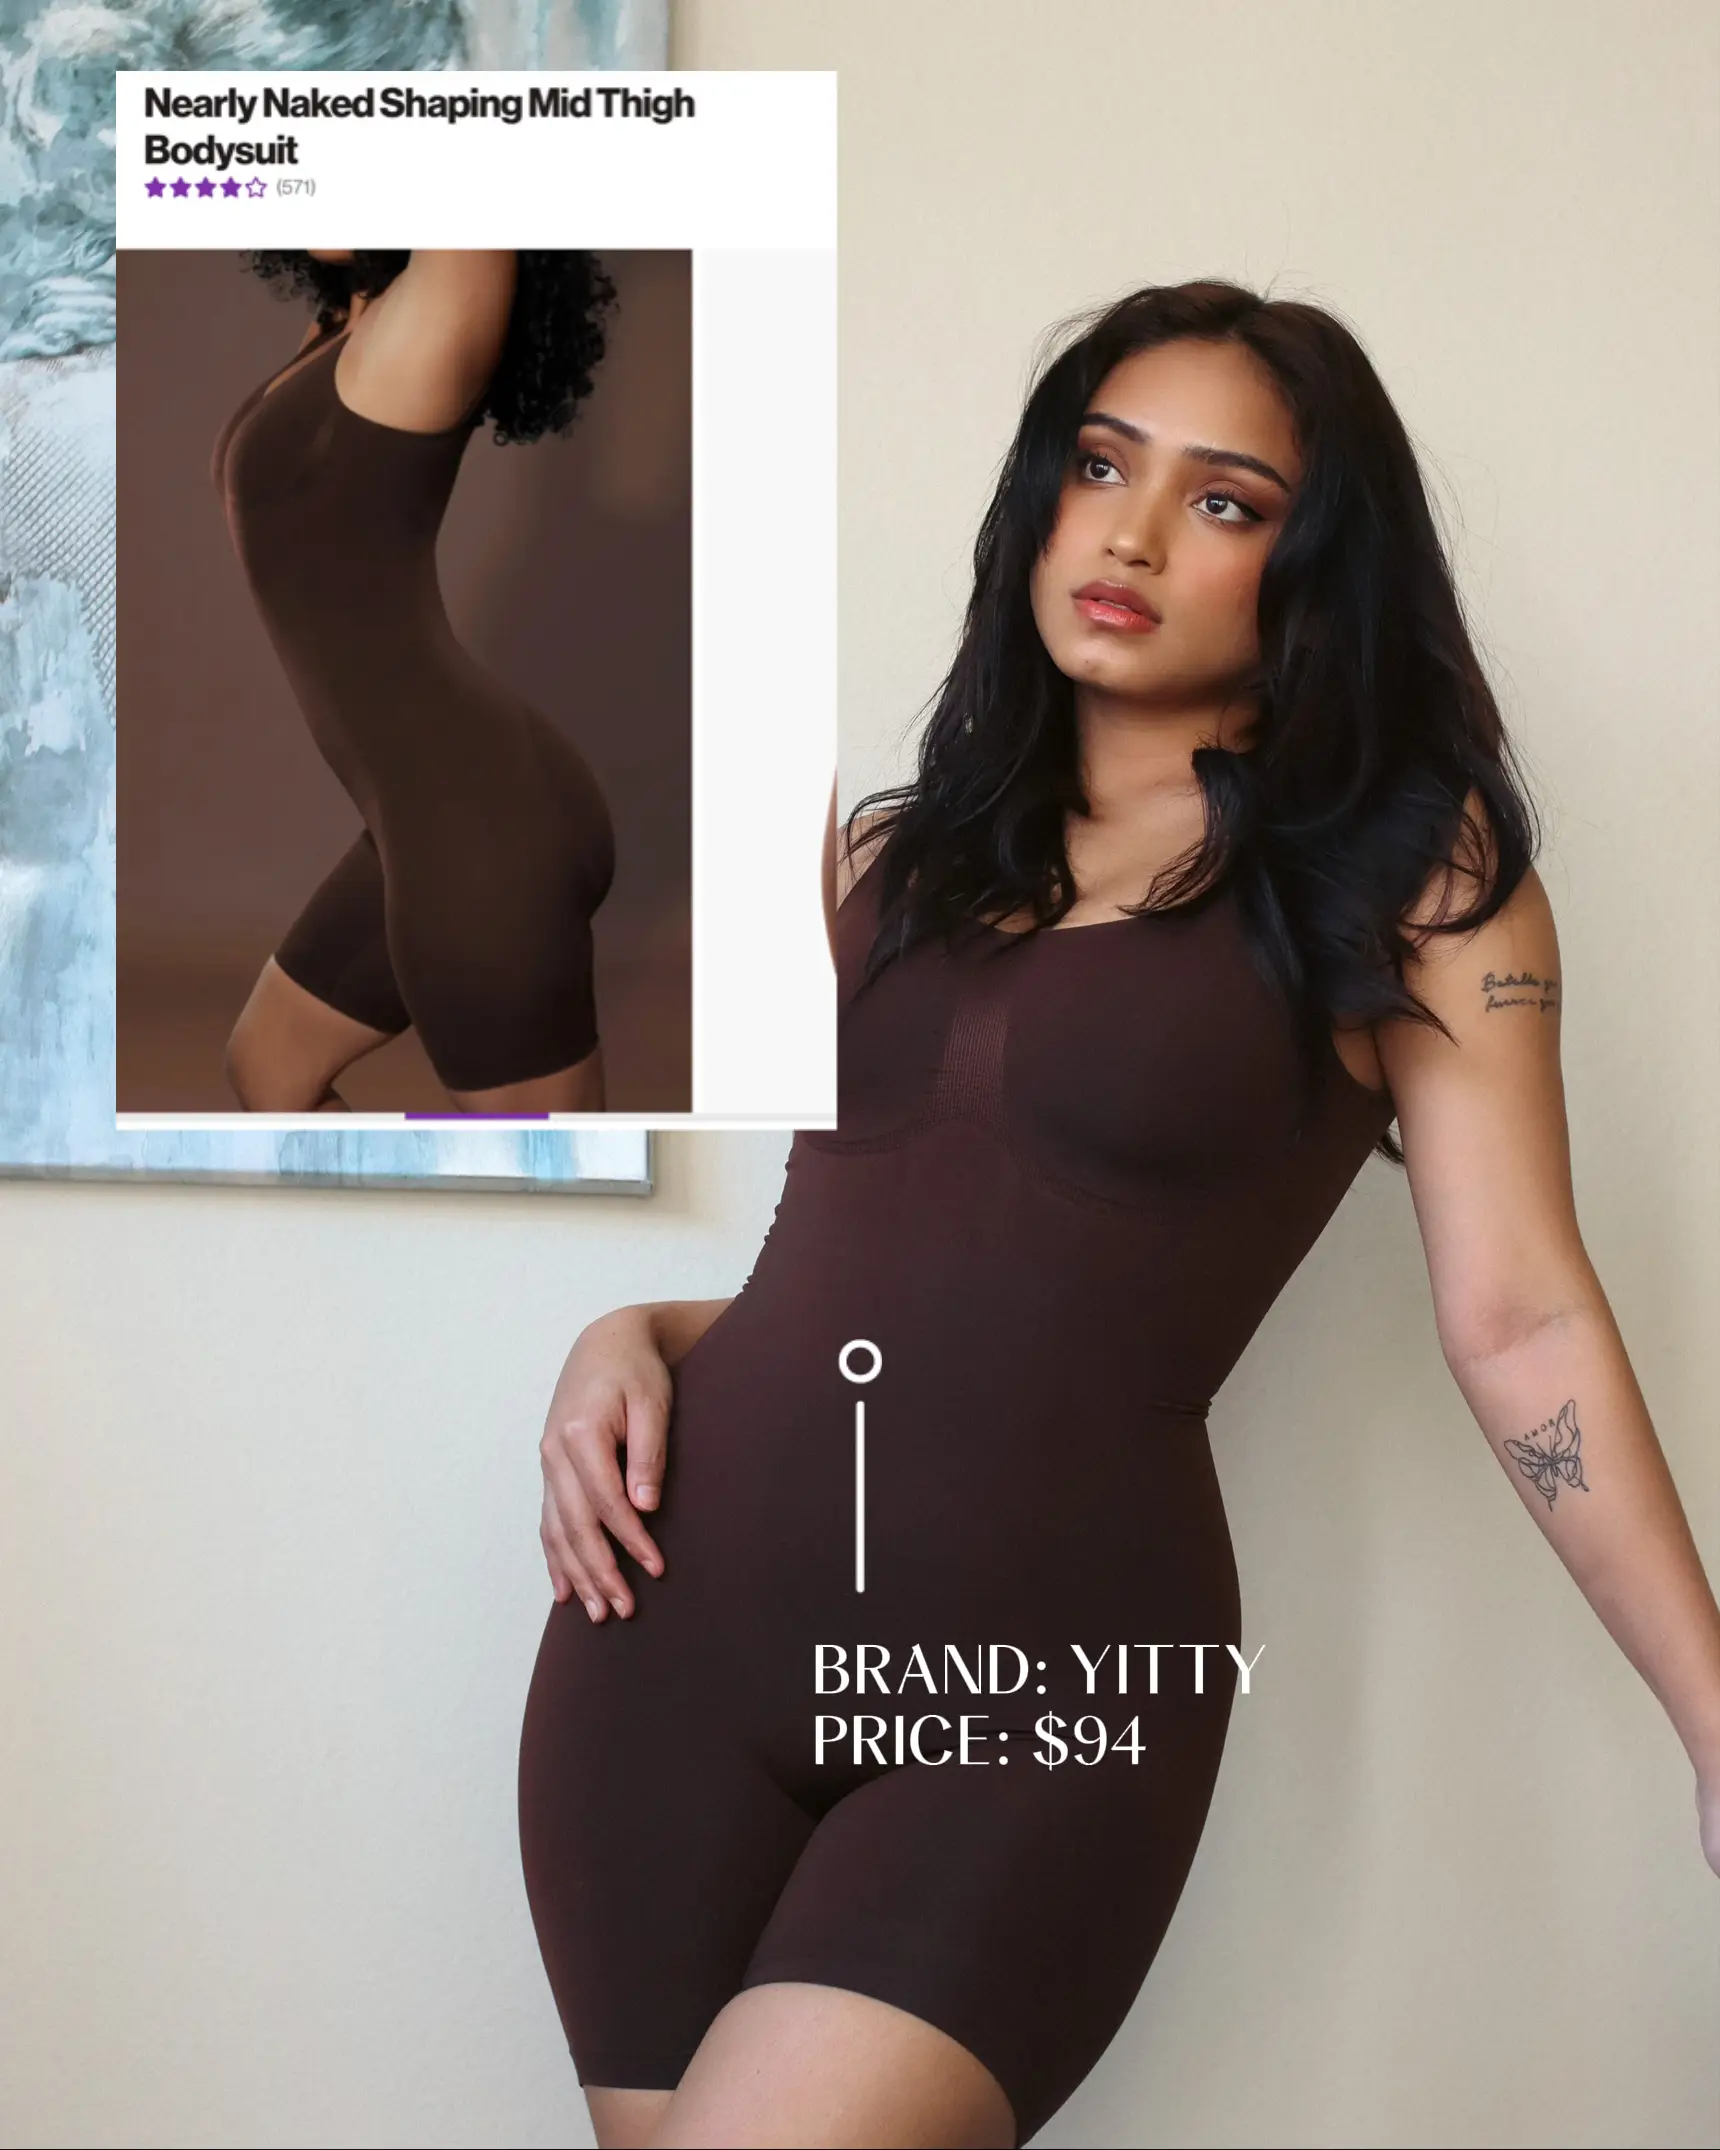 Yitty + Nearly Naked Shaping Mid Thigh Bodysuit